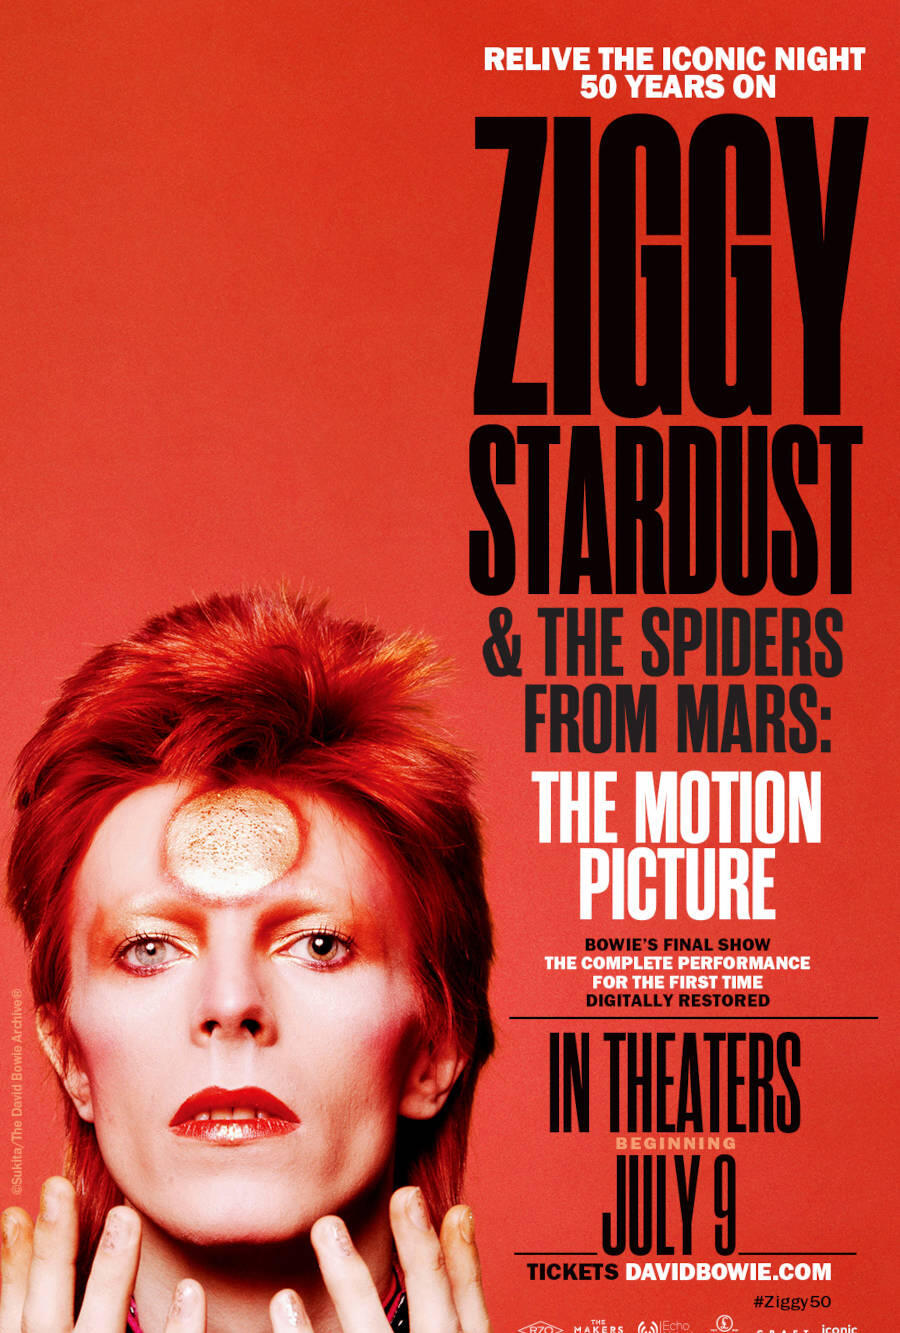 Watch David Bowie: Ziggy Stardust and The Spiders From Mars on BBC Select